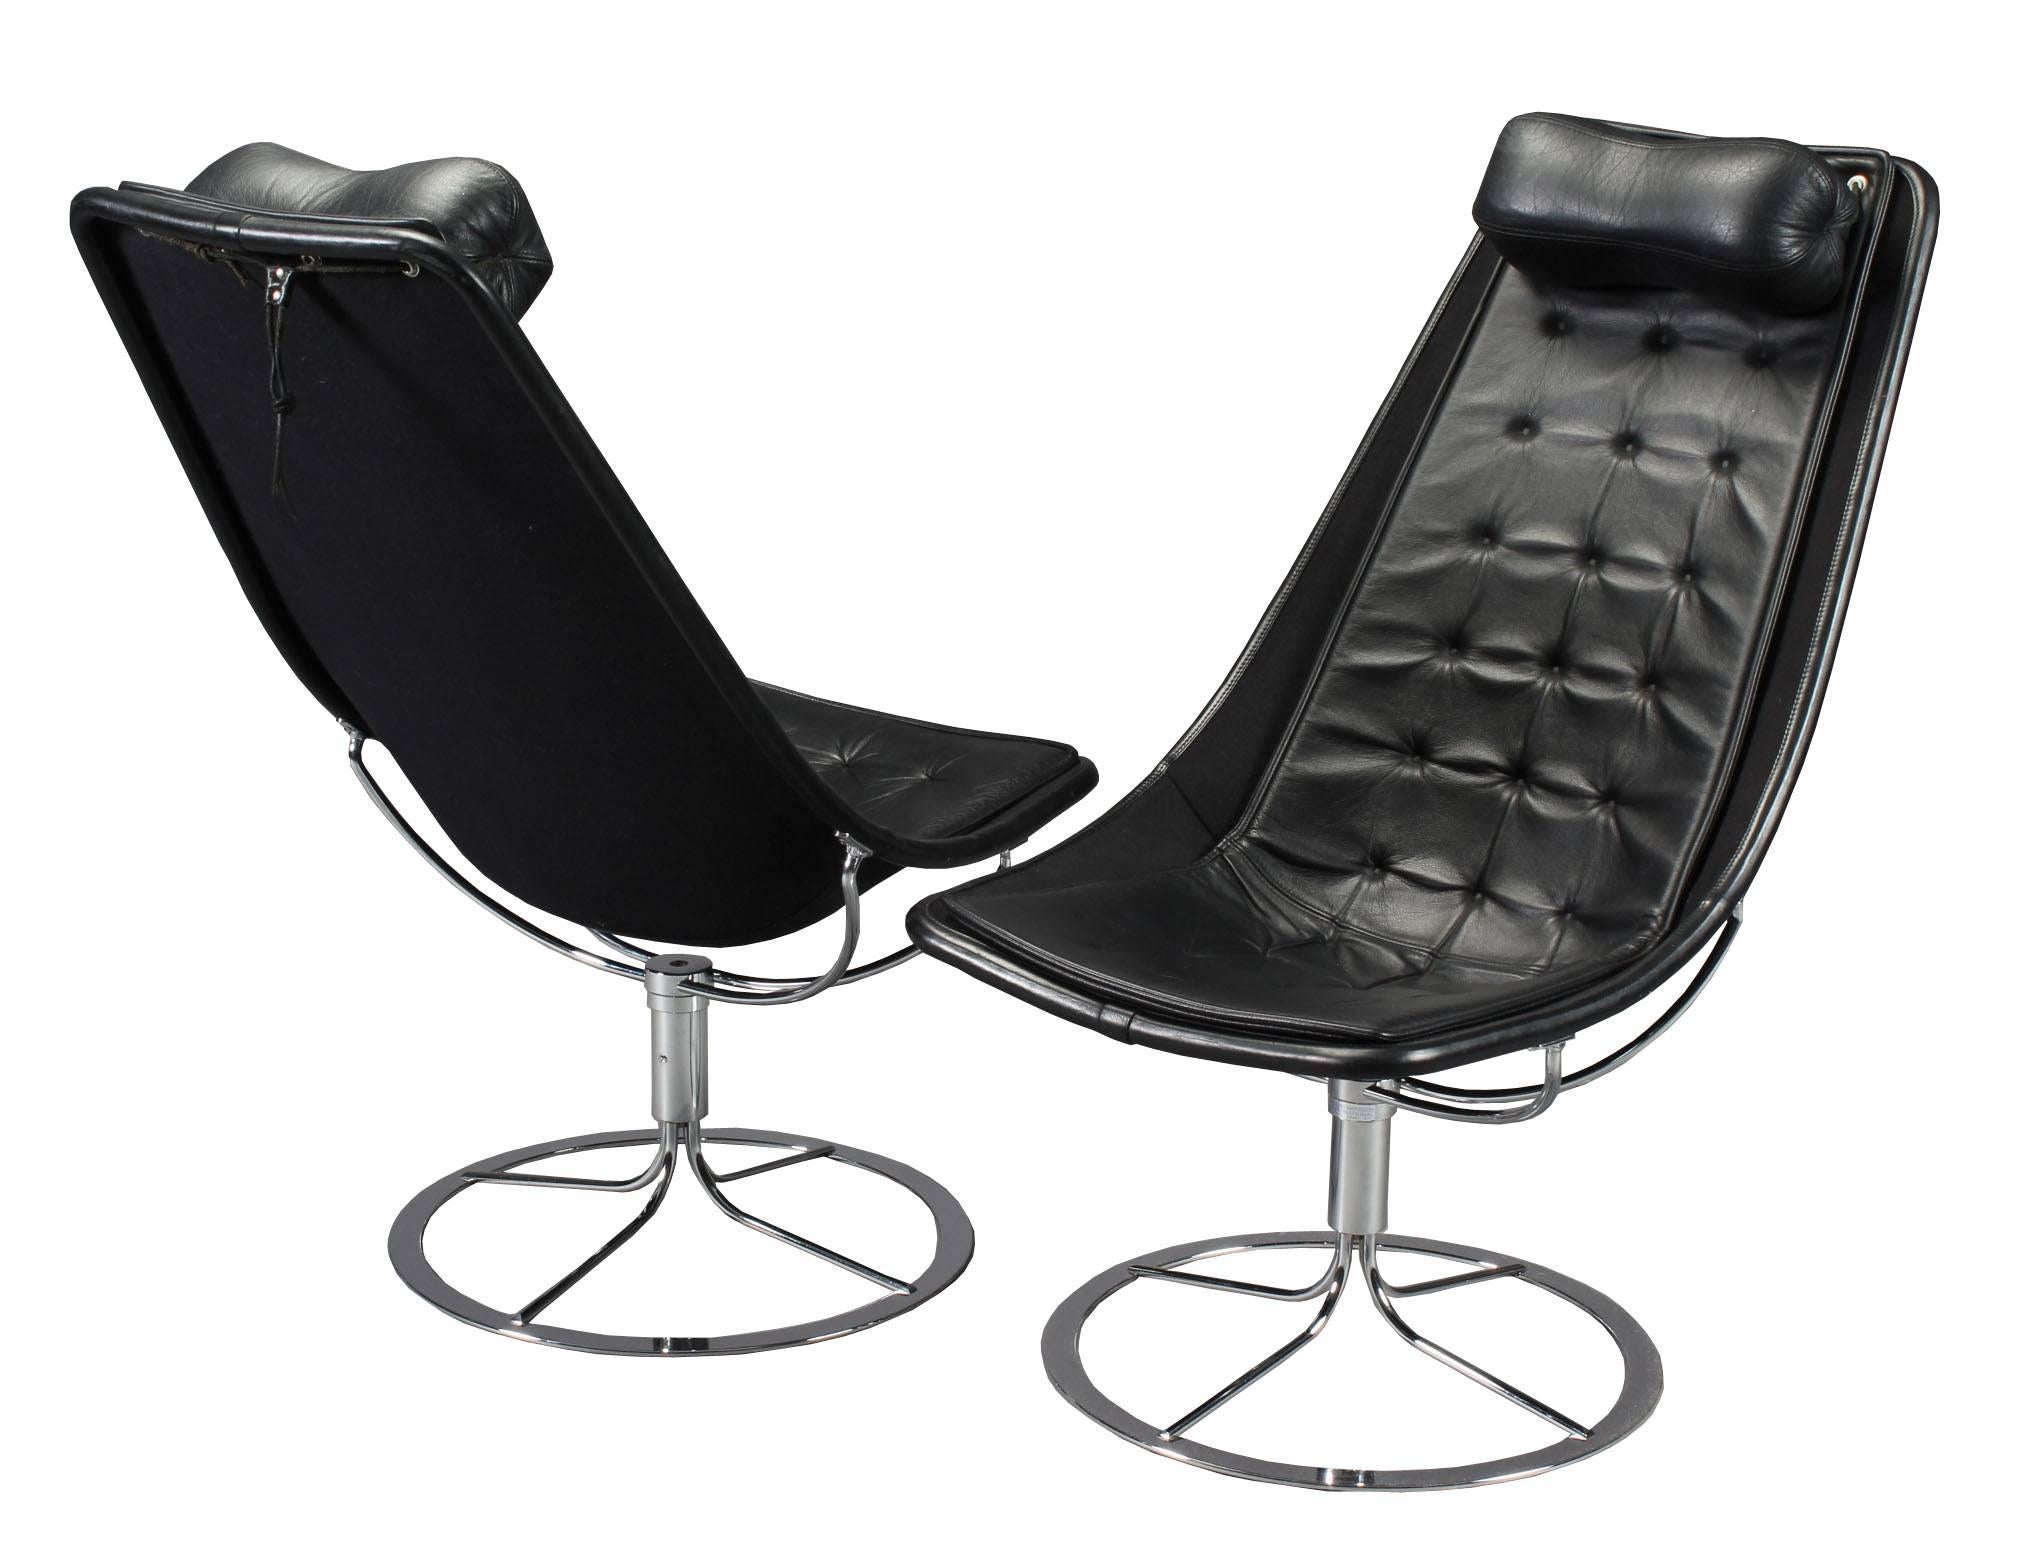 Jetson 66 Lounge chairs by Bruno Mathsson's, produced by Bruno Mathsson International, Sweden, in 1960s. Upholstered with black leather, deep-set buttons, and adjustable pillow. Has a solid steel chrome-plated base. Two button missing on the deep